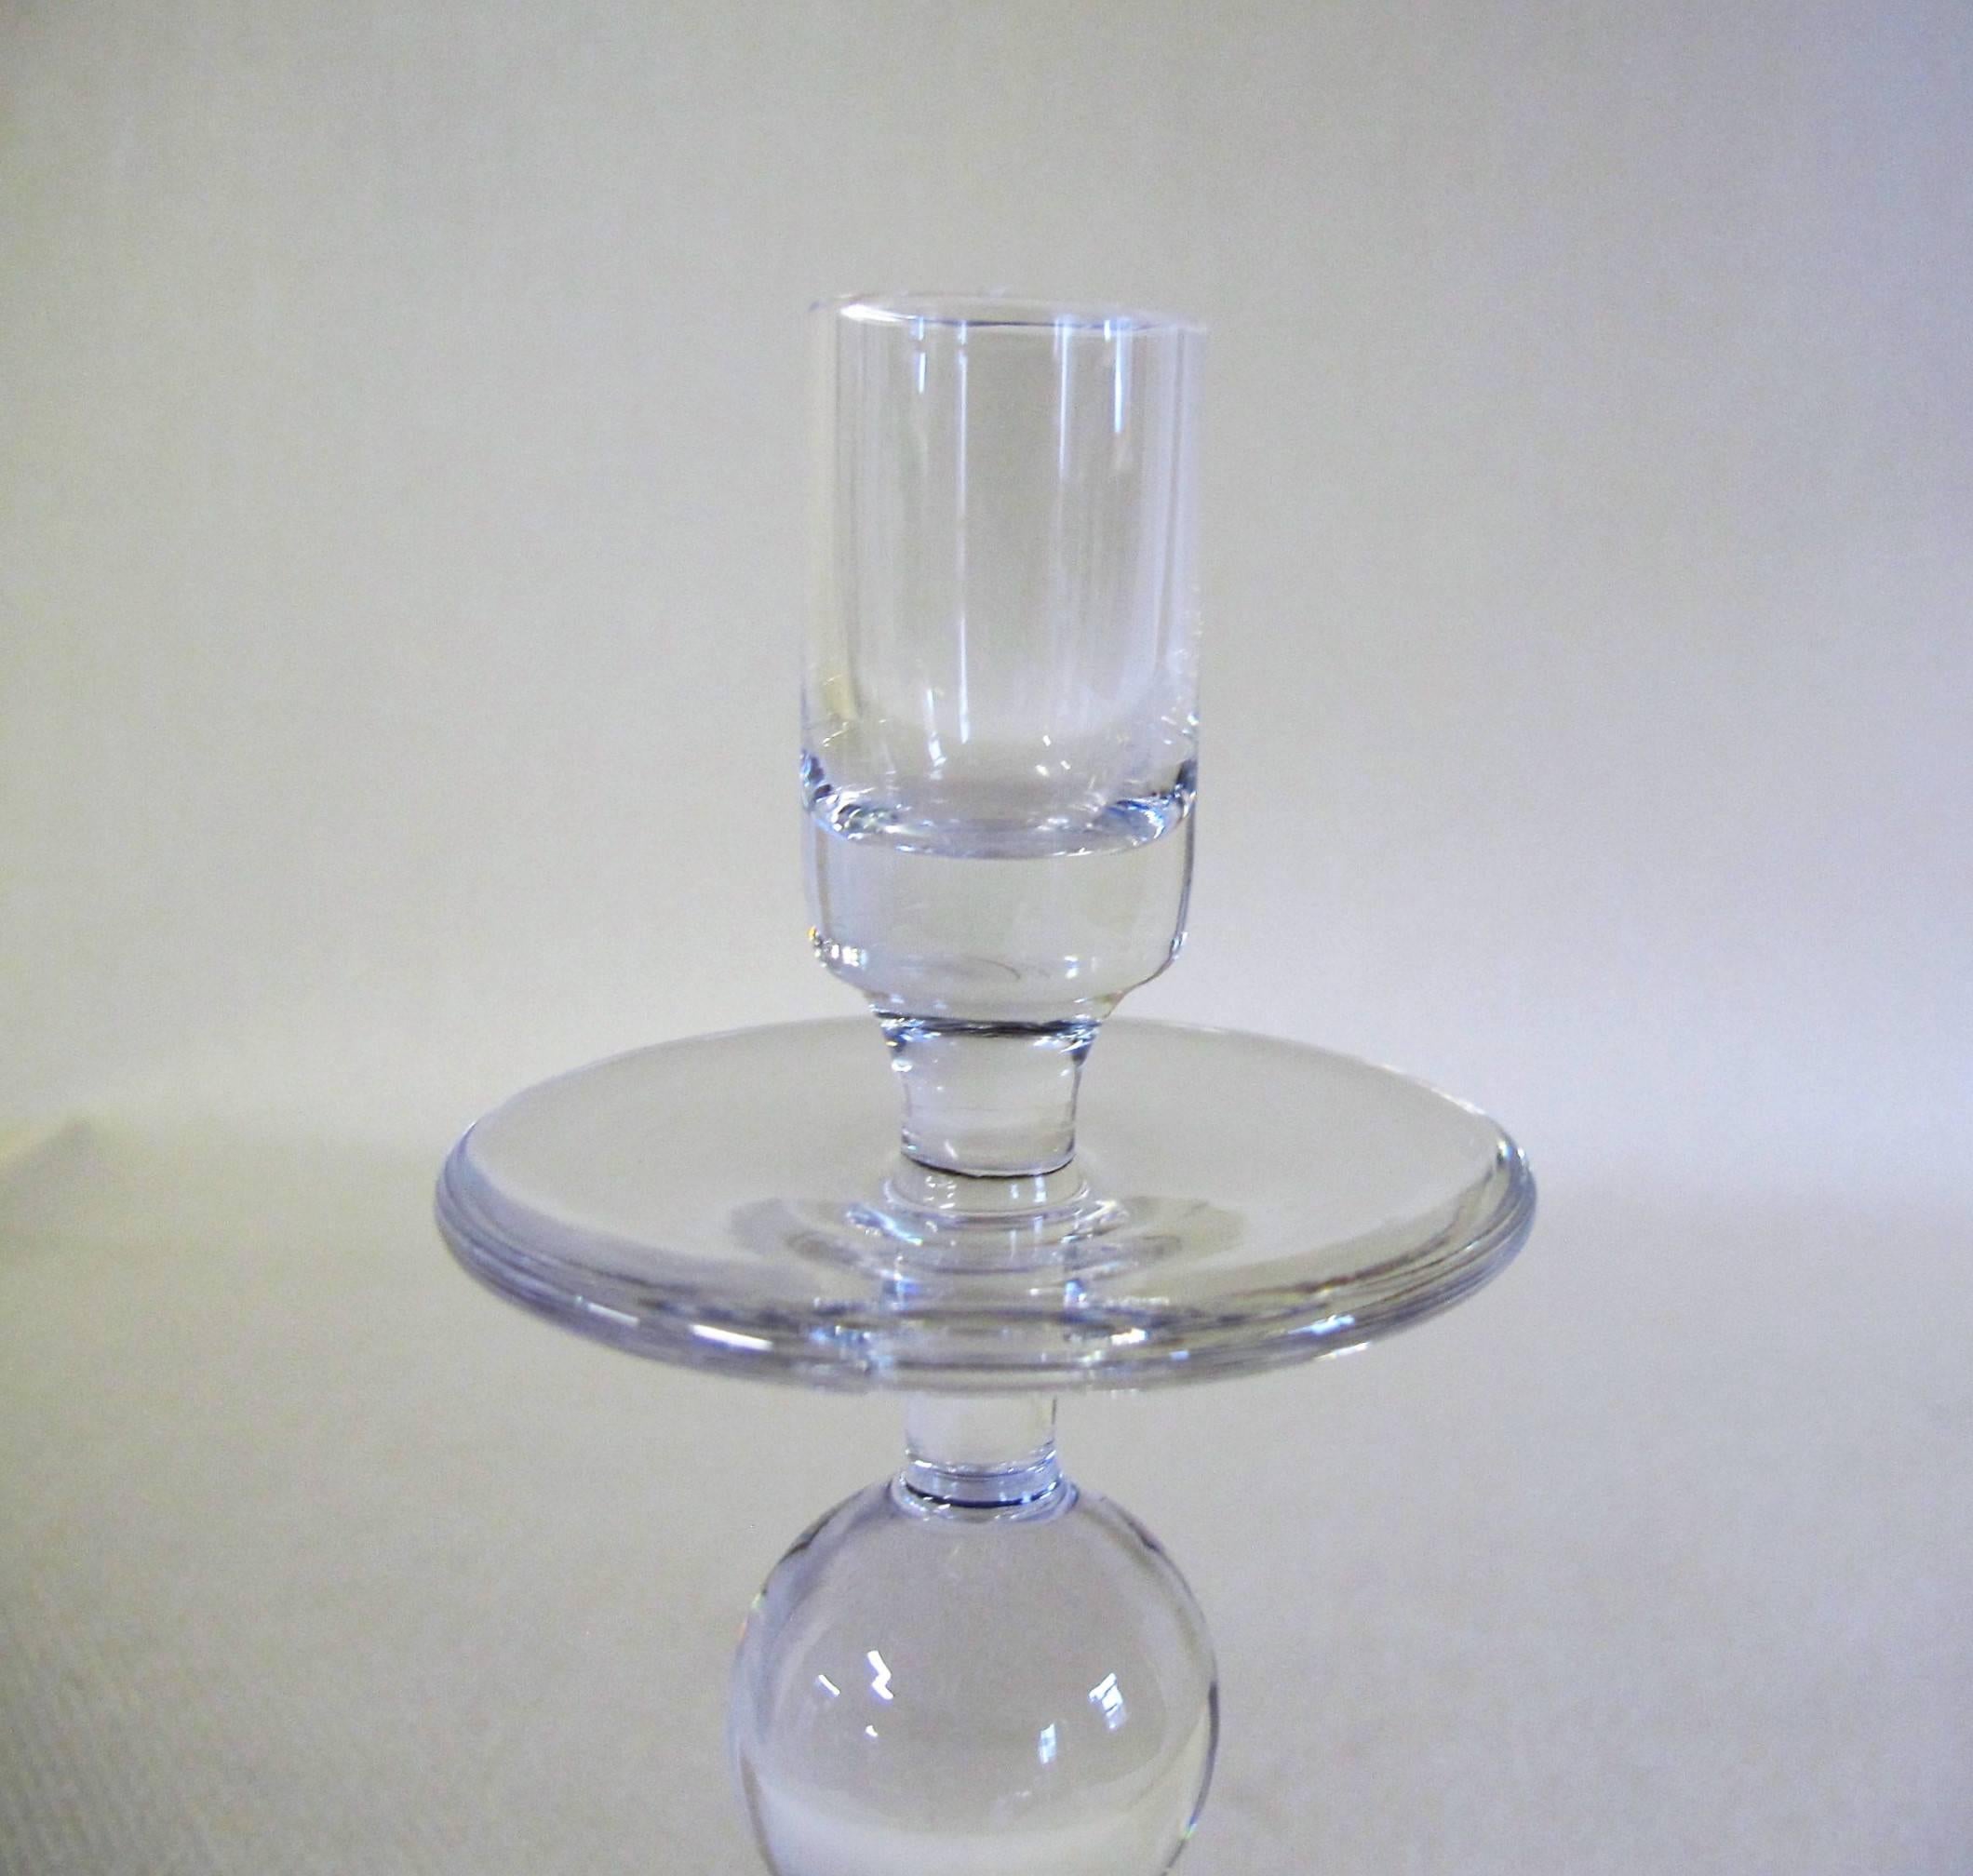 Mid-Century Modern Crystal Candleholder, Designed by A. D. Copier for Royal Leerdam, 1963